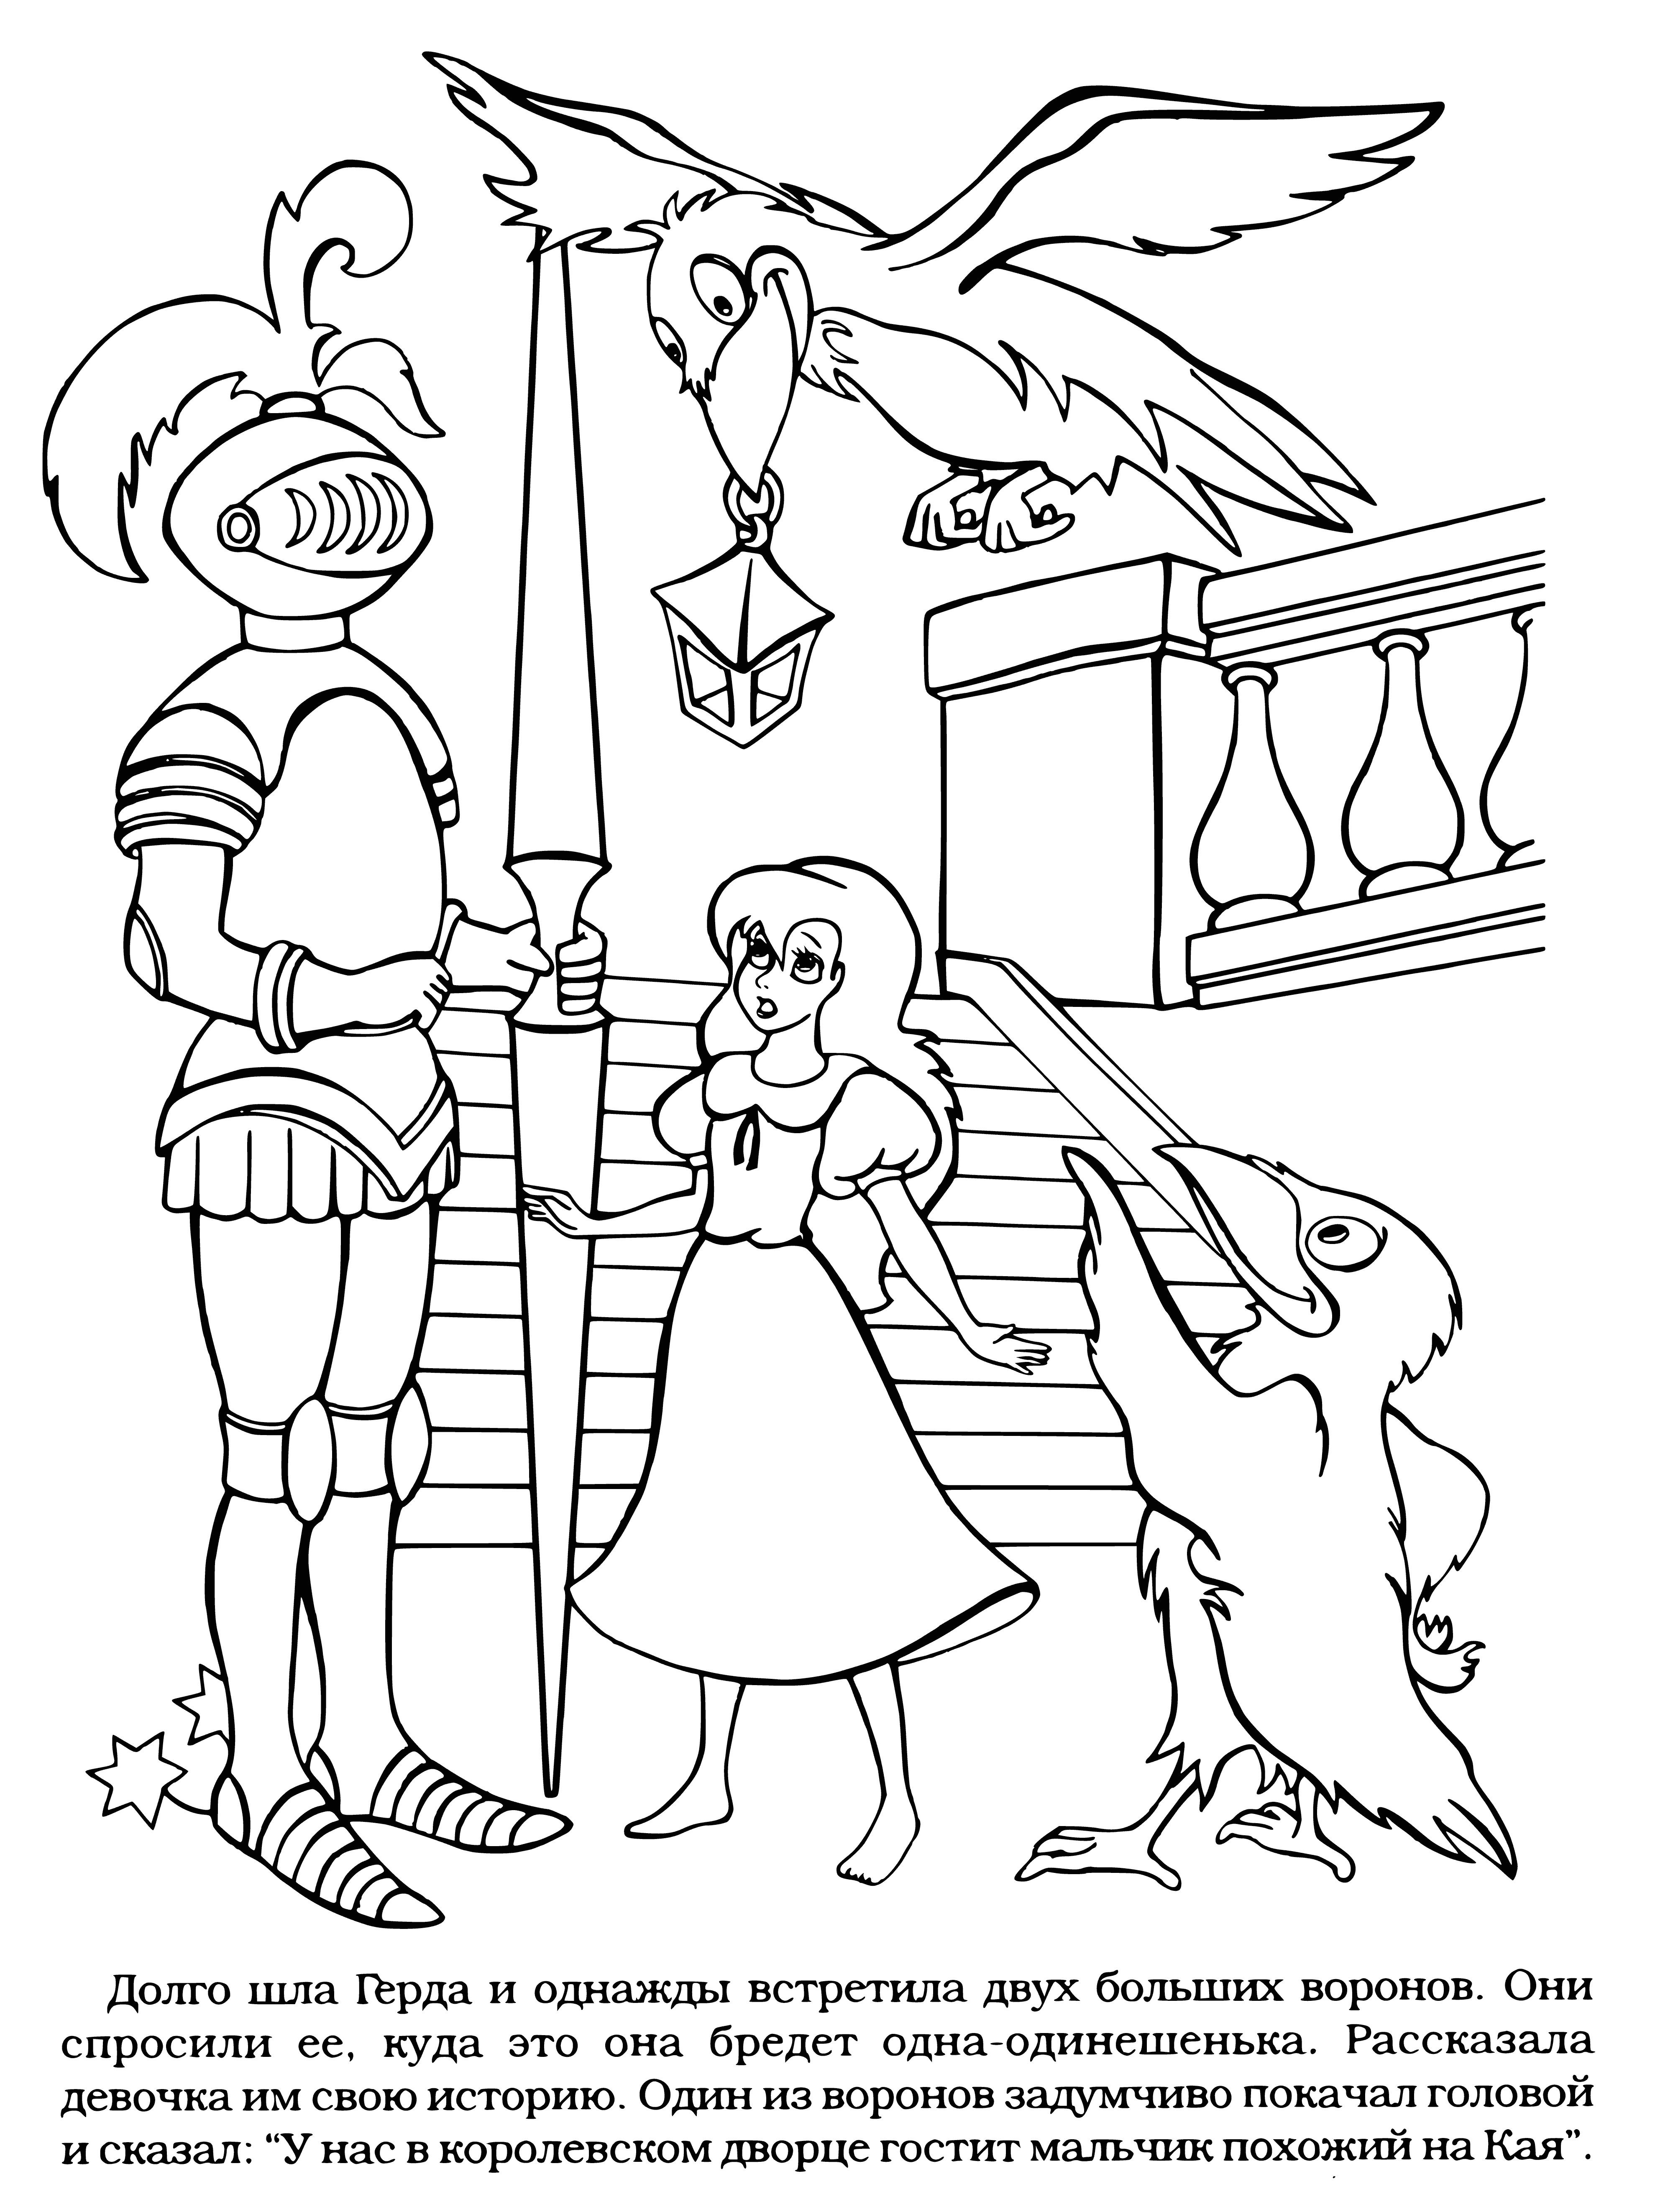 coloring page: Three crows perch on wire fence; one eats bread, one gazes off, one gazes at viewer. Girl runs towards crows in distance.